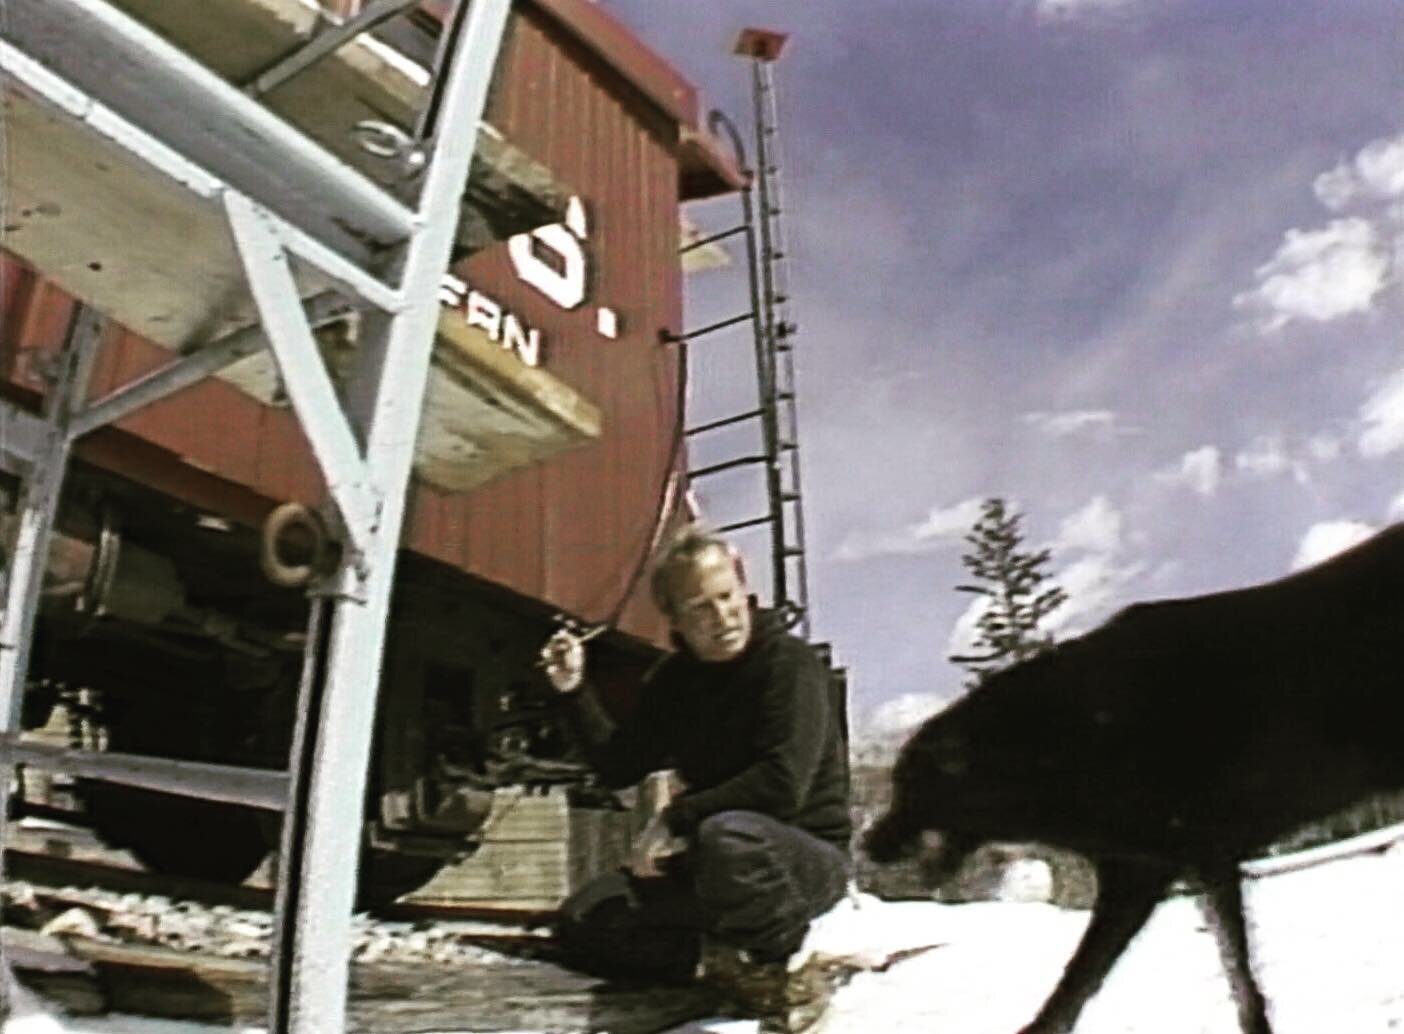 Lost news footage from Channel 4 Denver shows Tom Young and his dog in 1987 - just months before they mysteriously disappeared. | #documentary #silverplume #colorado #mountains #tomyoung #keithreinhard #missingperson #coldcase #truecrime #filmmaking